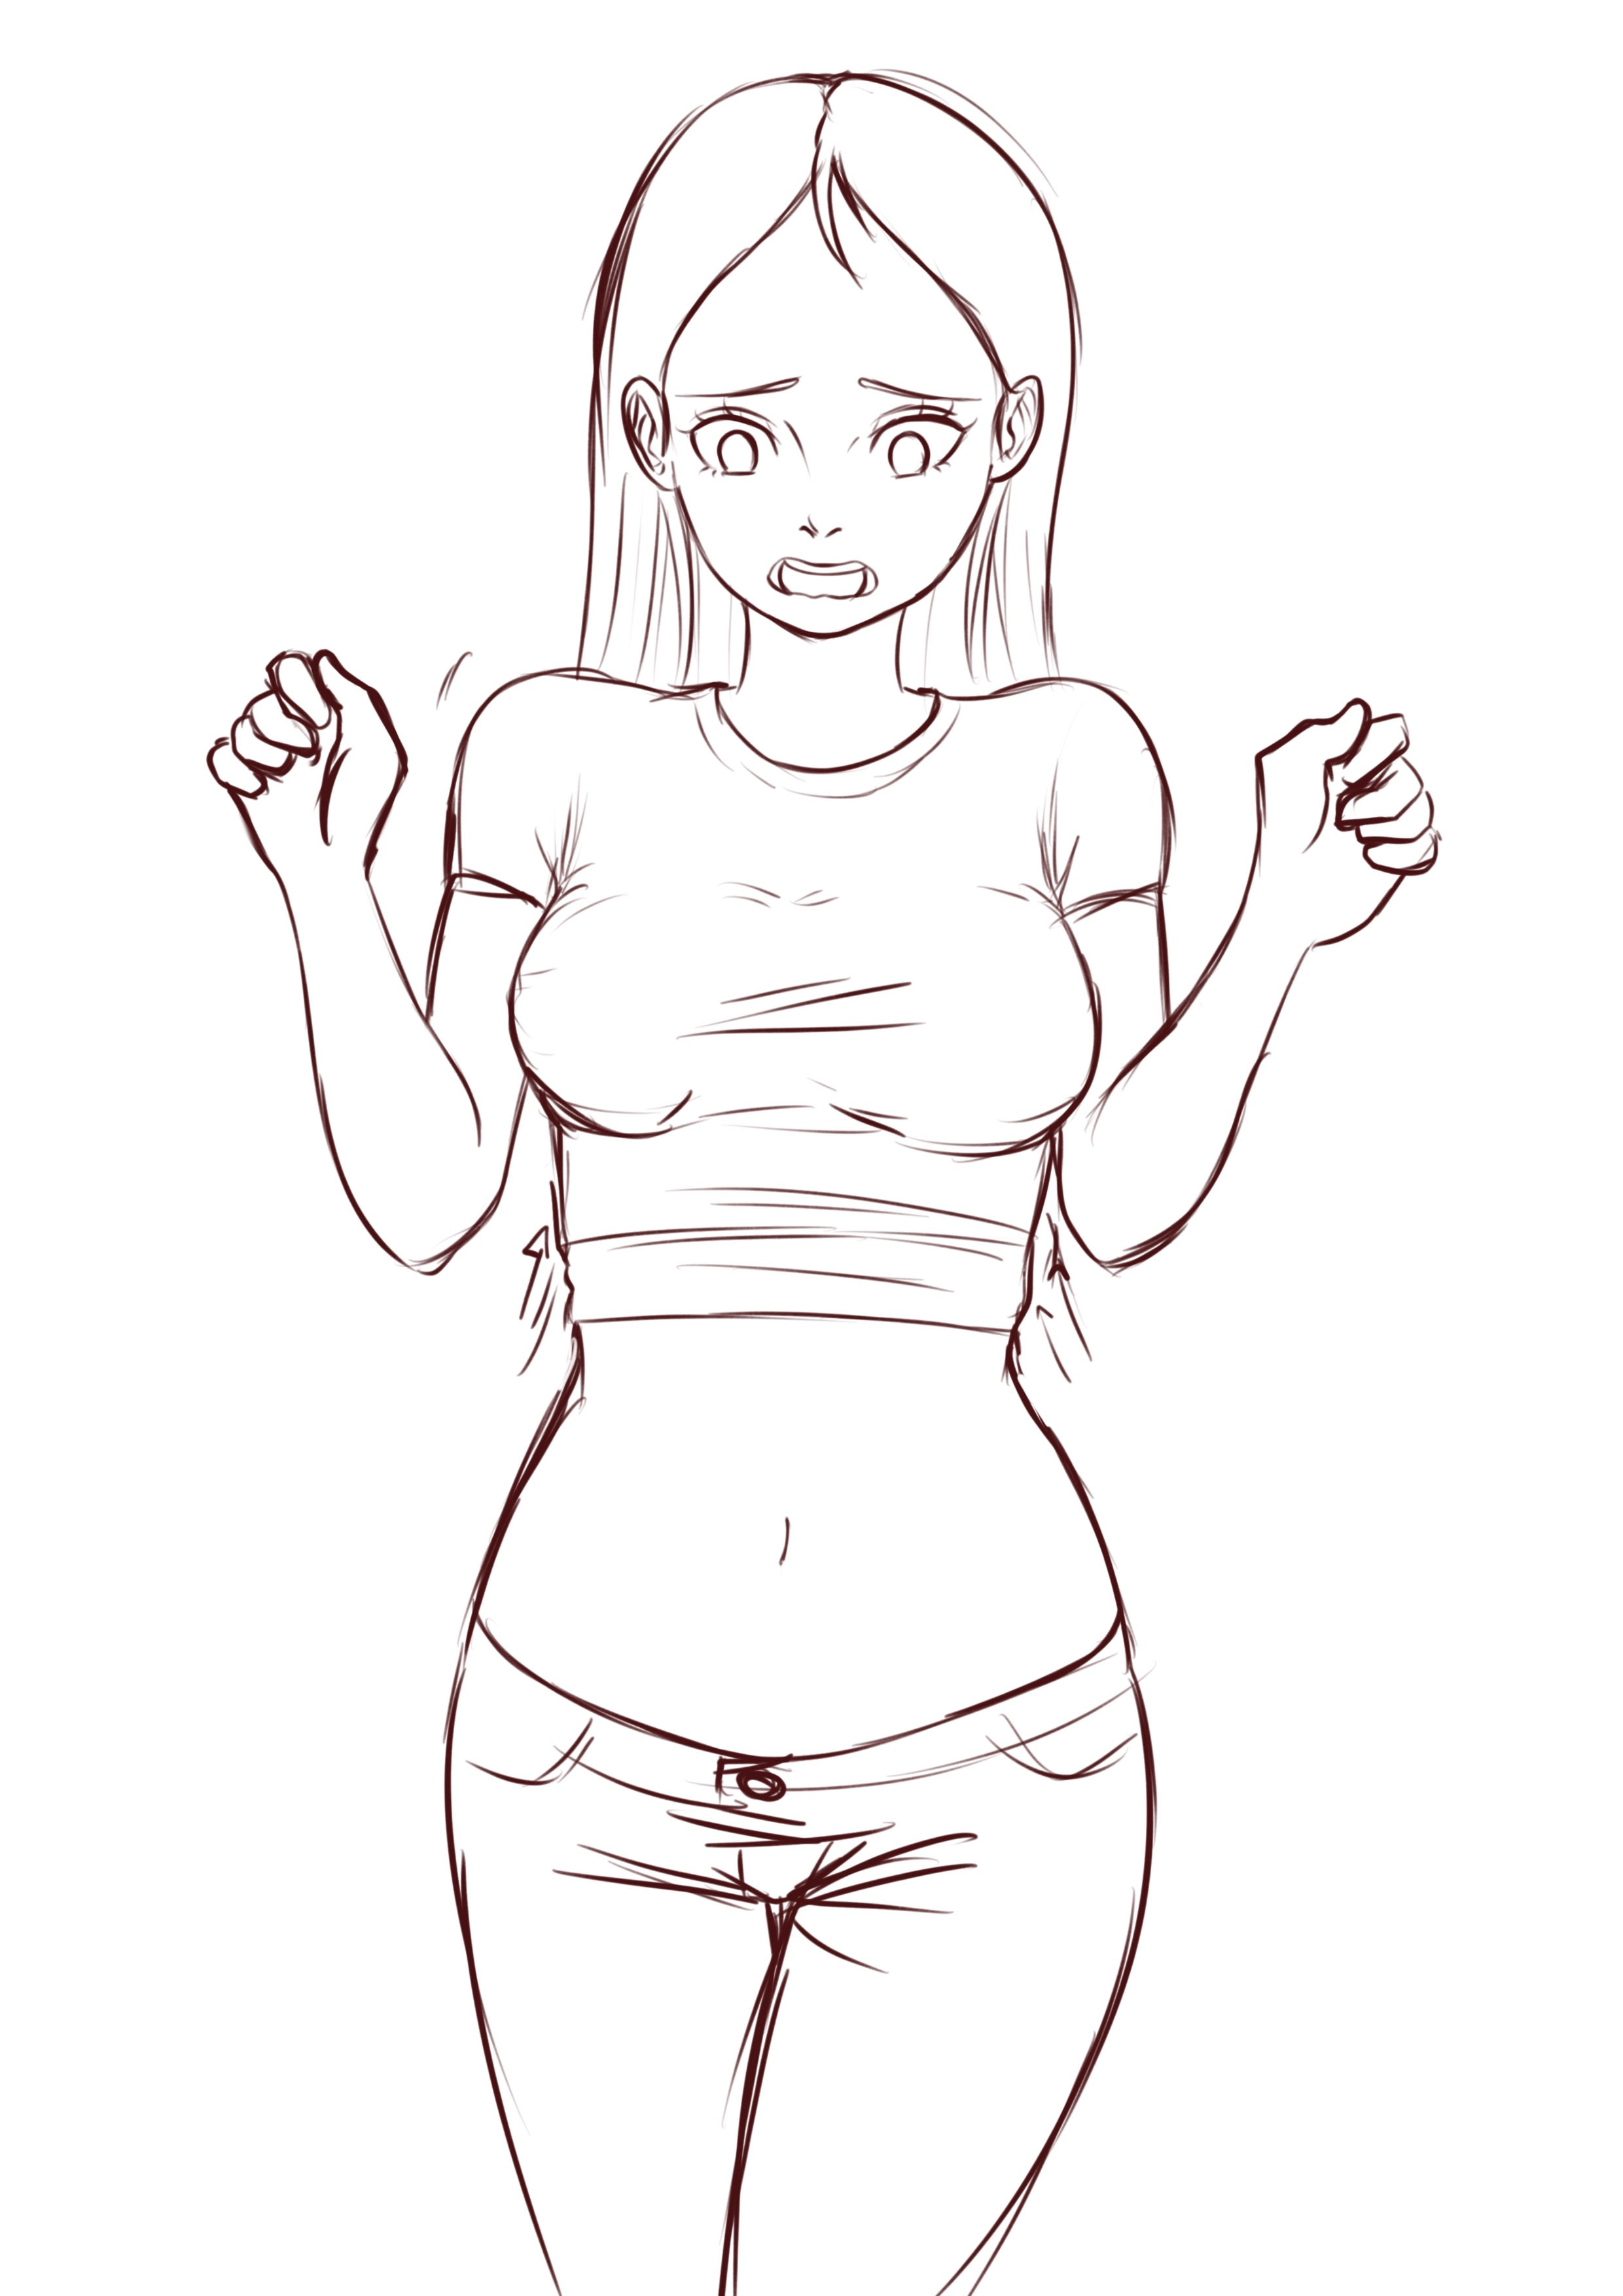 Amelie's shrinking clothes